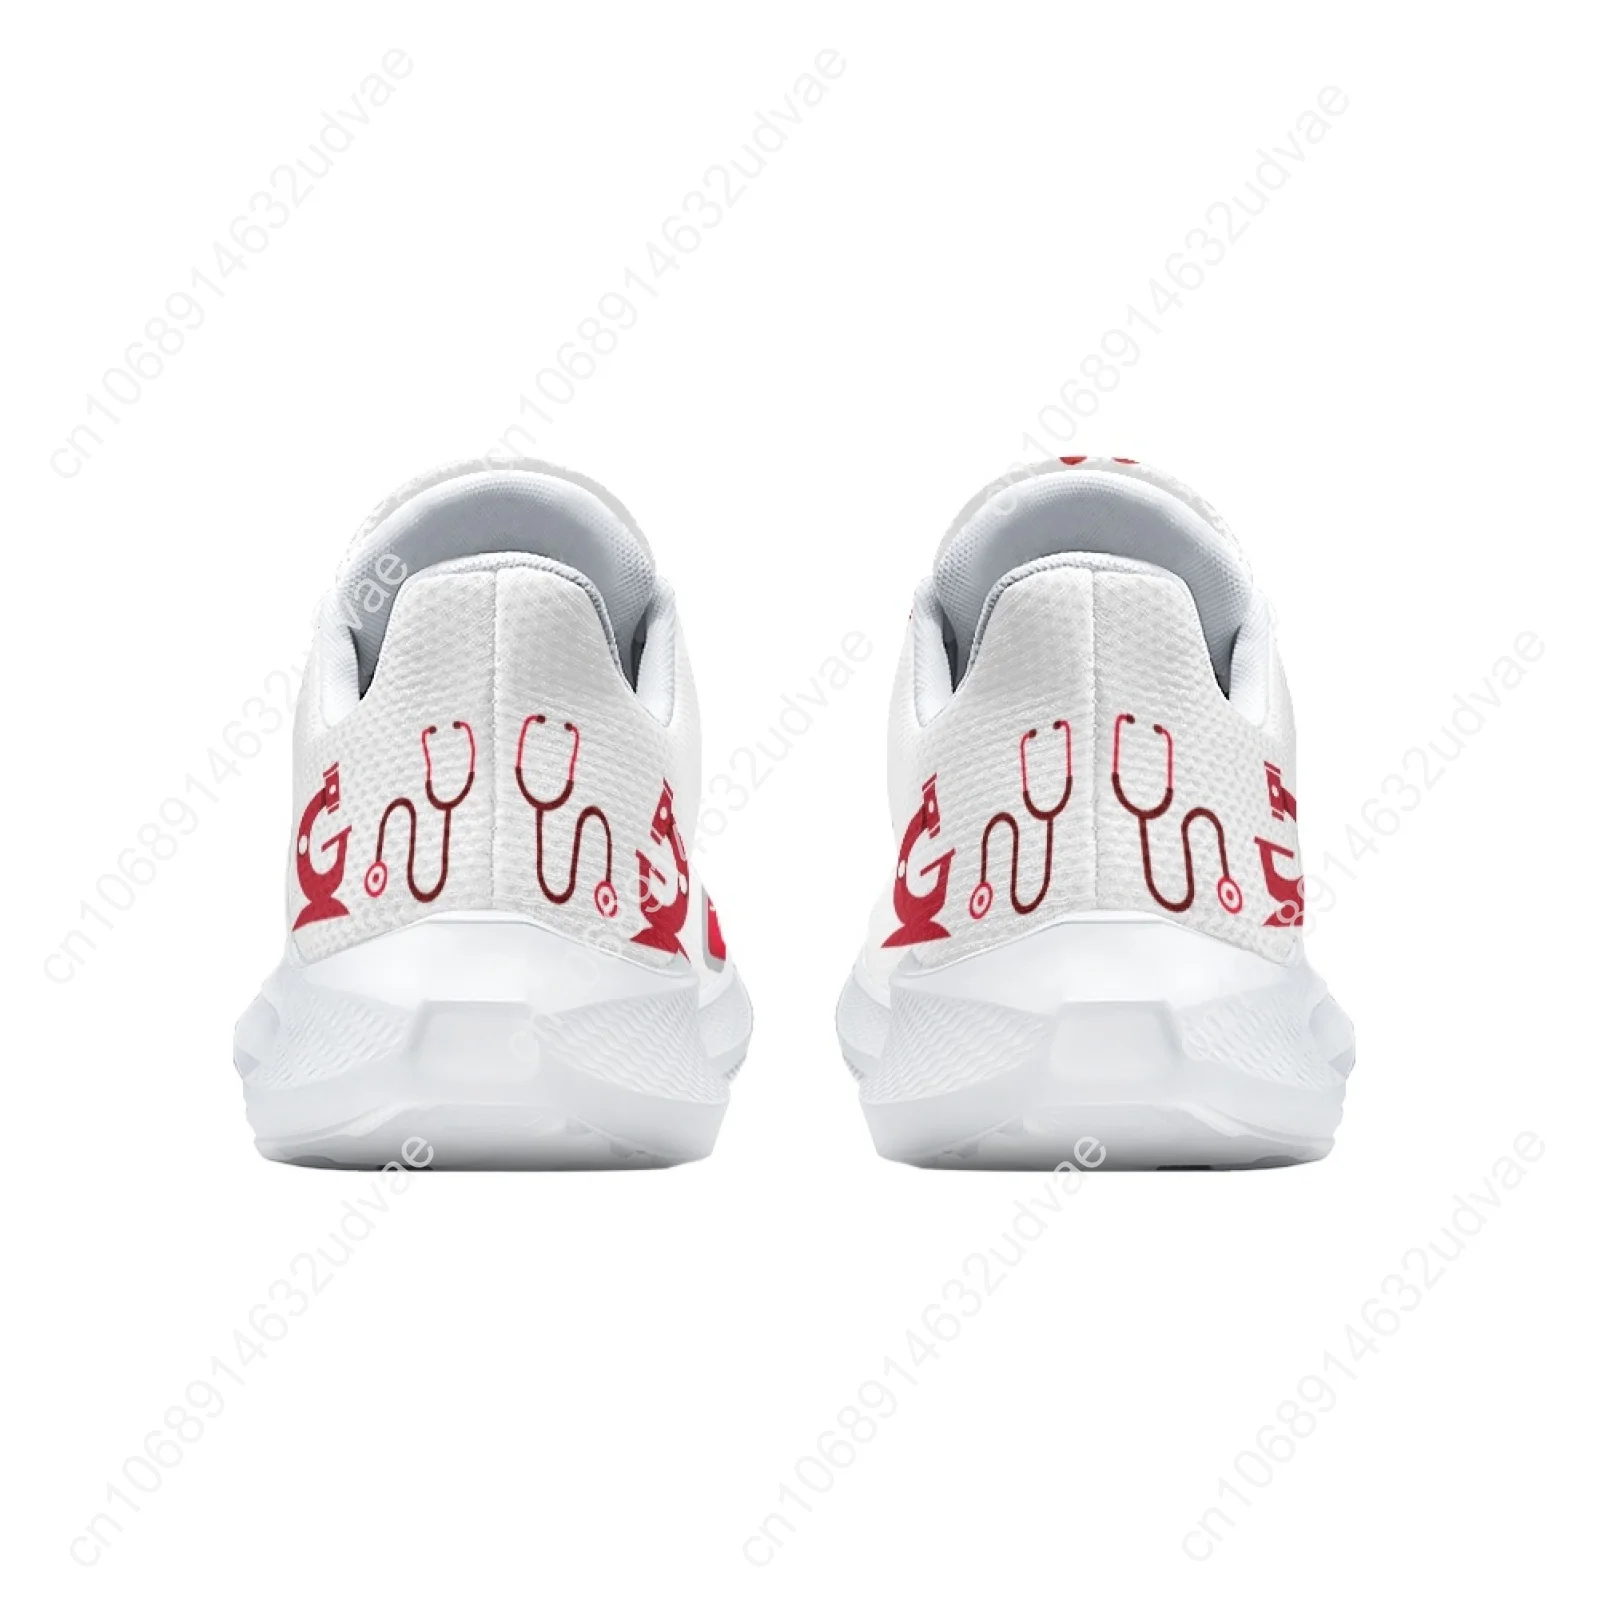 White Nursing Shoes For Women Cartoon Medical Doctor Running Shoes ECG Printed Comfortable Girls Fitness Sneakers